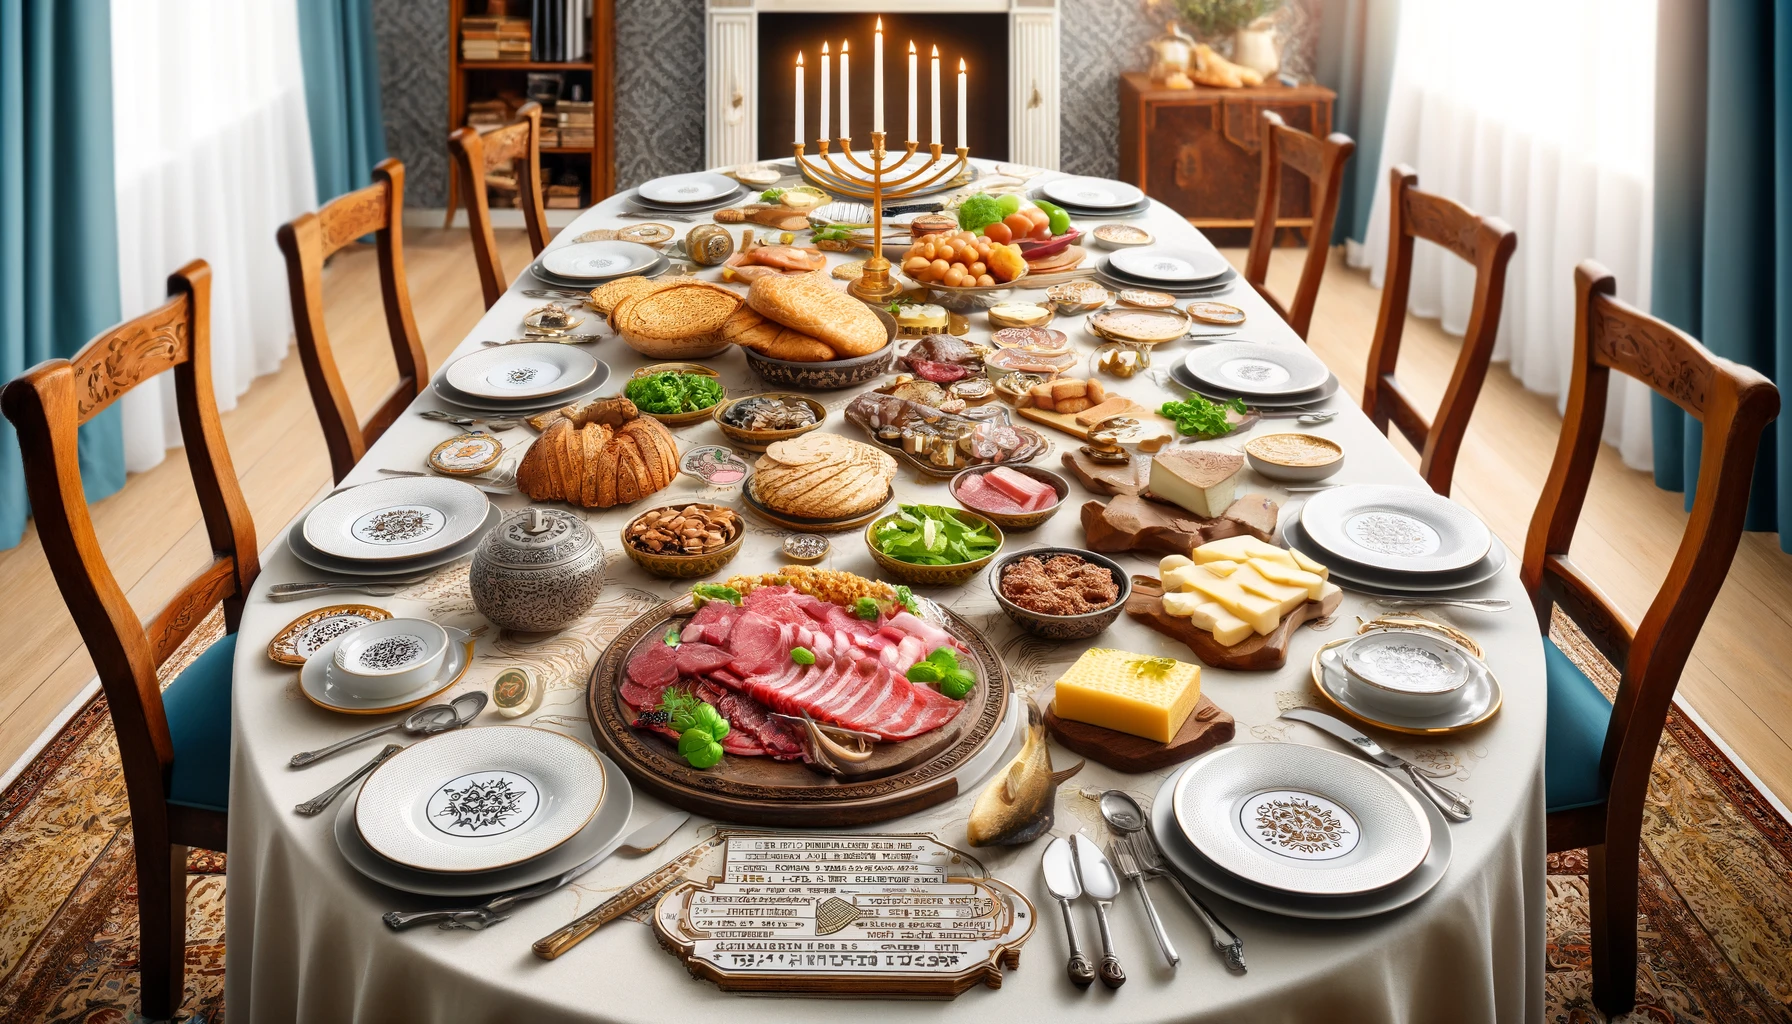 A beautifully set dining table showcasing a variety of kosher foods. The table includes sections with separate sets of dishes and cutlery for meat